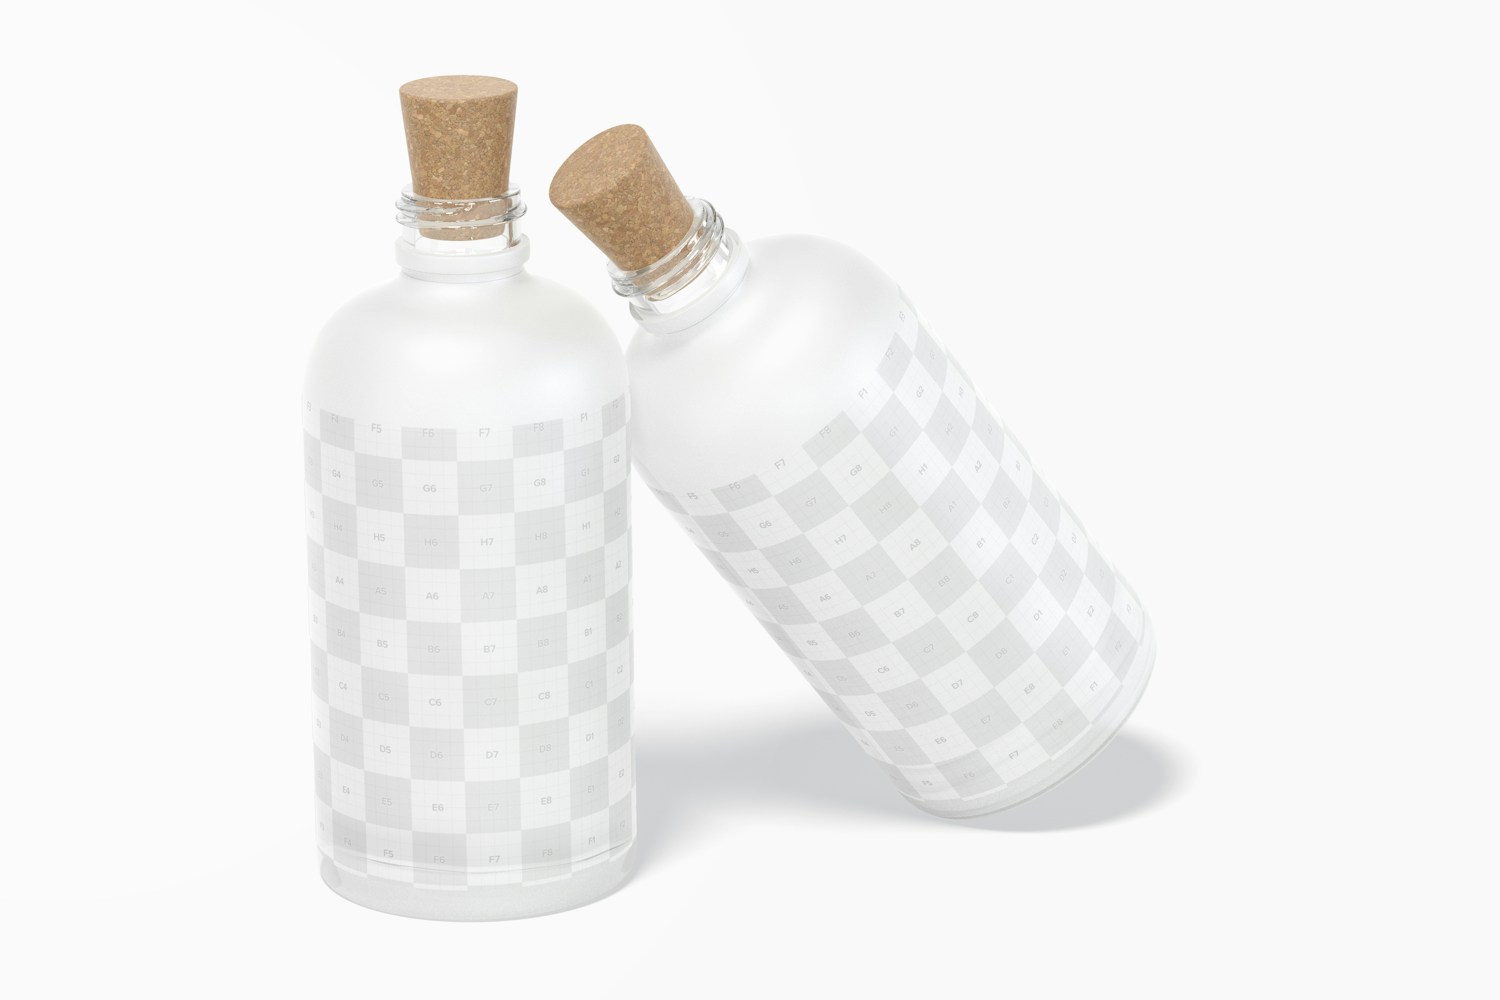 Frosted Glass Bottles with Cork Mockup